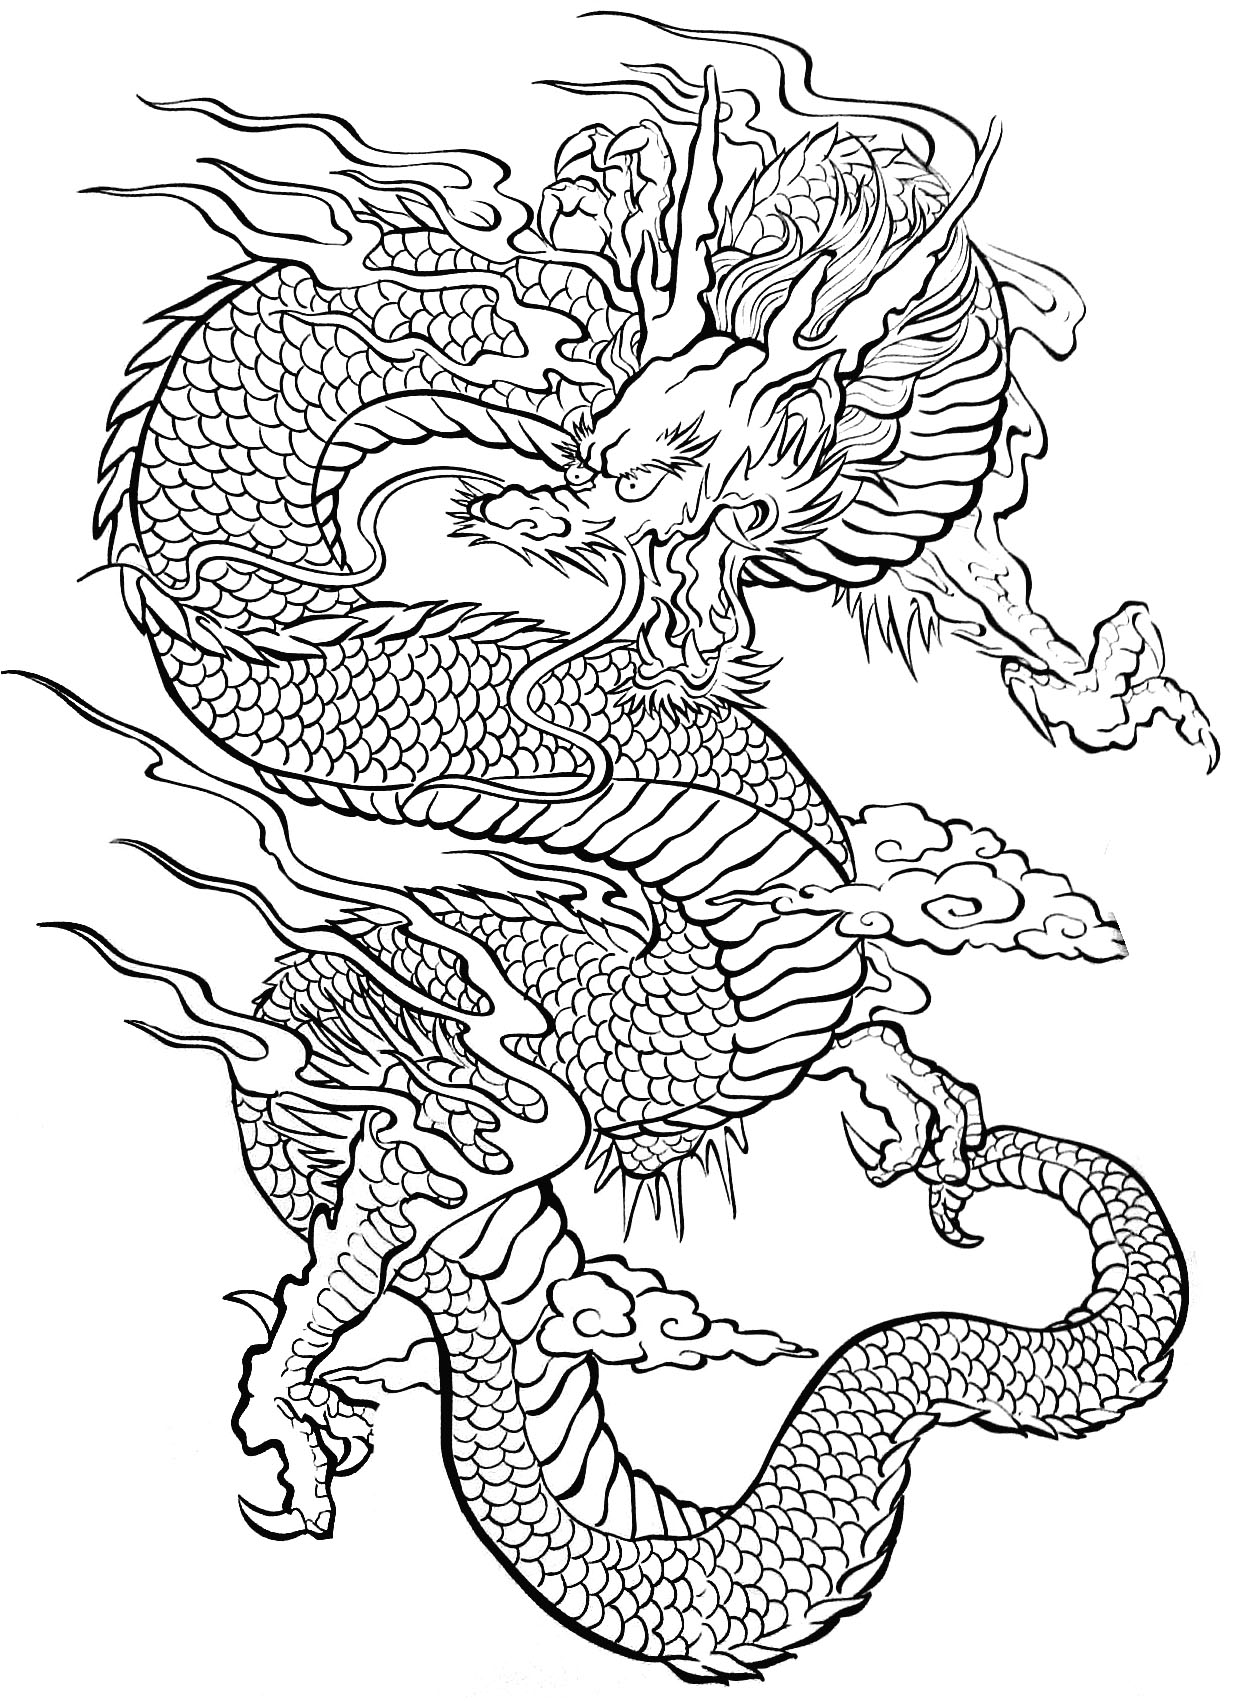 Download Tattoo dragon - Tattoos Adult Coloring Pages